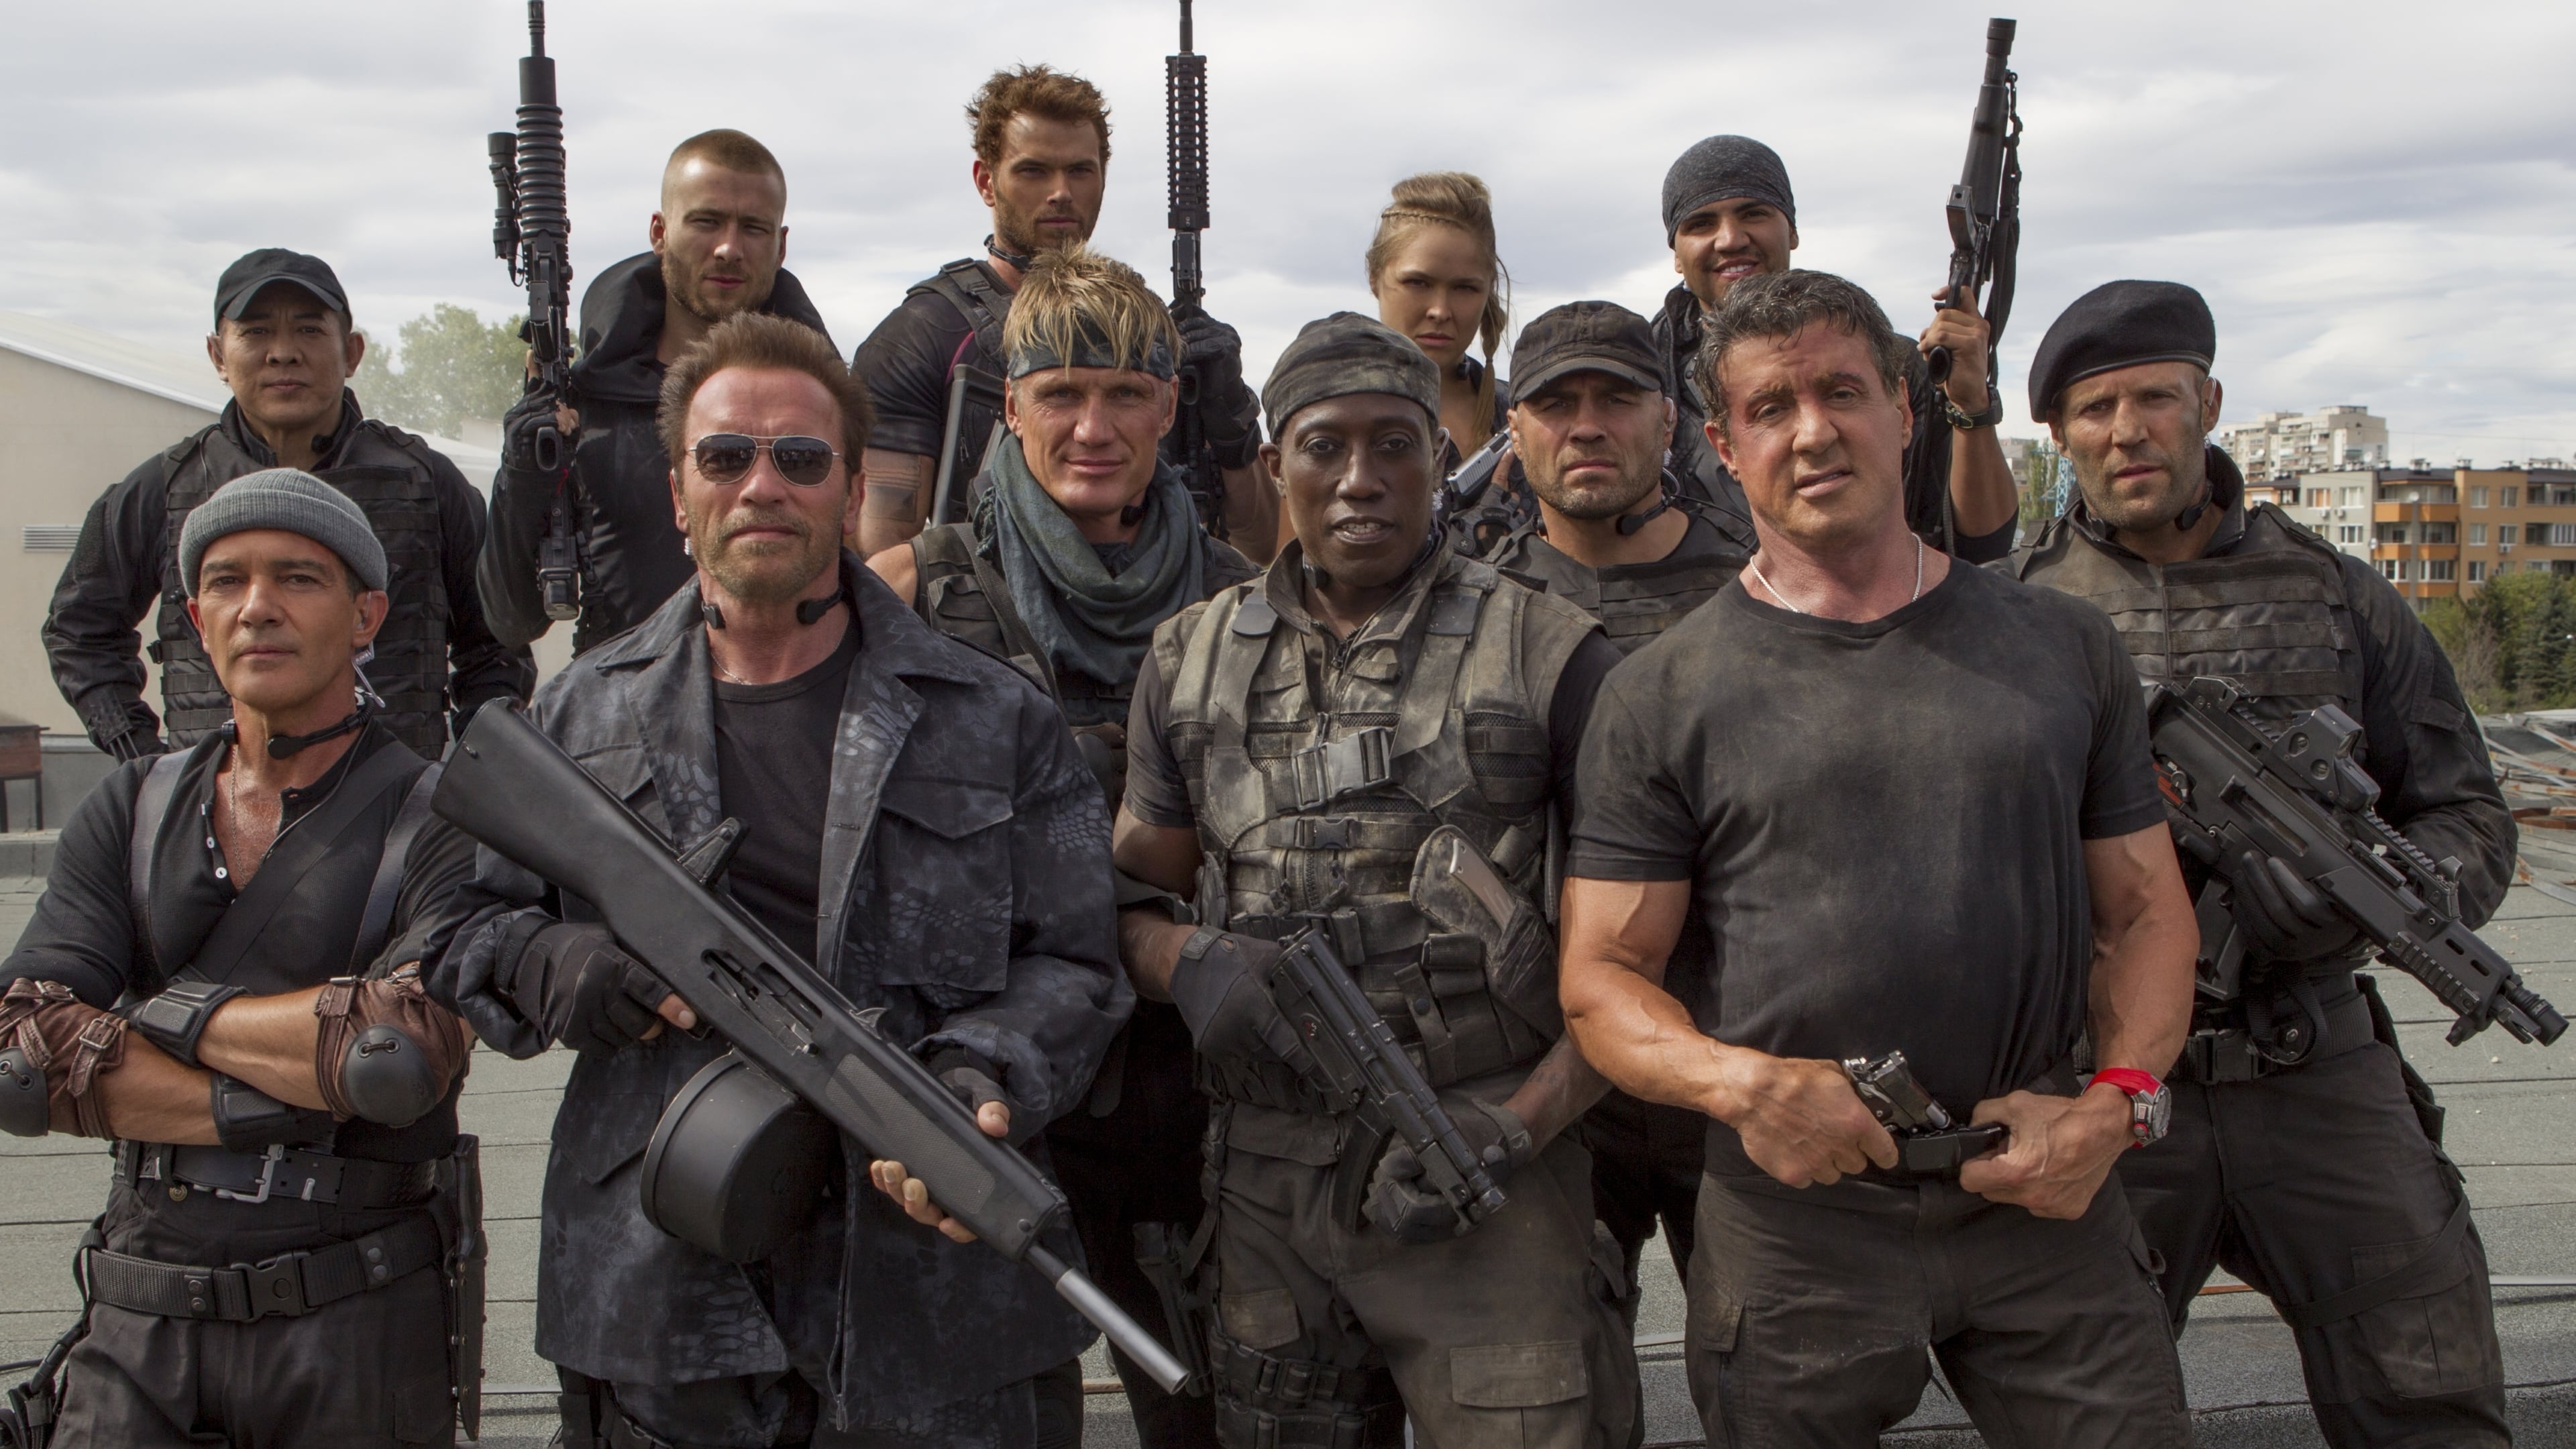 Image du film Expendables 3 2fmmwp7oulplb4gkny18woo1sx7jpg